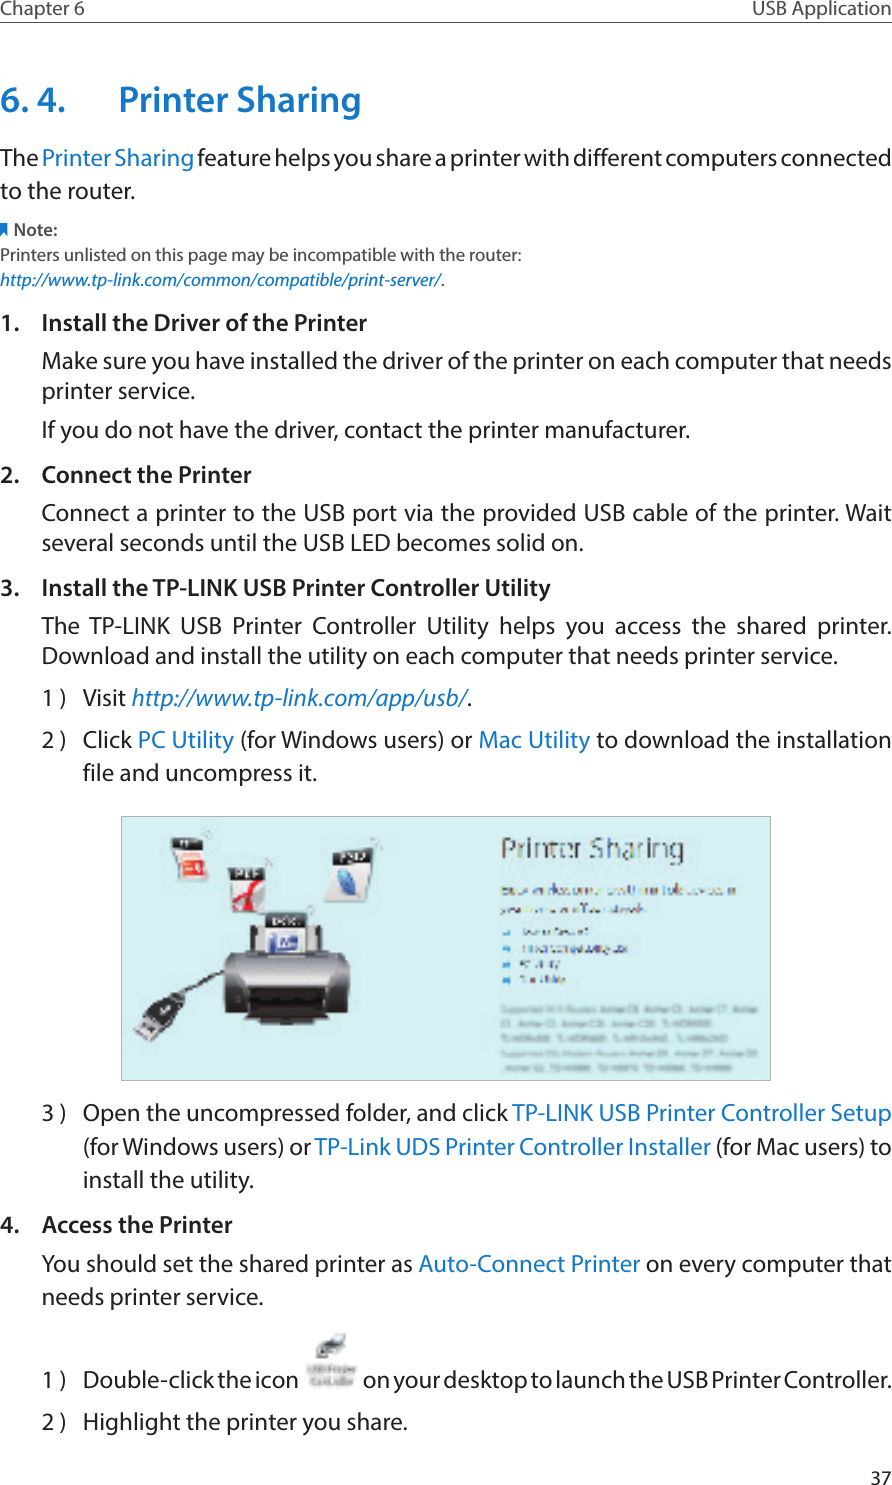 37Chapter 6 USB Application6. 4.  Printer SharingThe Printer Sharing feature helps you share a printer with different computers connected to the router.Note:Printers unlisted on this page may be incompatible with the router: http://www.tp-link.com/common/compatible/print-server/.1.  Install the Driver of the PrinterMake sure you have installed the driver of the printer on each computer that needs printer service.If you do not have the driver, contact the printer manufacturer.2.  Connect the PrinterConnect a printer to the USB port via the provided USB cable of the printer. Wait several seconds until the USB LED becomes solid on.3.  Install the TP-LINK USB Printer Controller UtilityThe TP-LINK USB Printer Controller Utility helps you access the shared printer. Download and install the utility on each computer that needs printer service.1 )  Visit http://www.tp-link.com/app/usb/.2 )  Click PC Utility (for Windows users) or Mac Utility to download the installation file and uncompress it.3 )  Open the uncompressed folder, and click TP-LINK USB Printer Controller Setup (for Windows users) or TP-Link UDS Printer Controller Installer (for Mac users) to install the utility.4.  Access the PrinterYou should set the shared printer as Auto-Connect Printer on every computer that needs printer service.1 )  Double-click the icon   on your desktop to launch the USB Printer Controller.2 )  Highlight the printer you share.